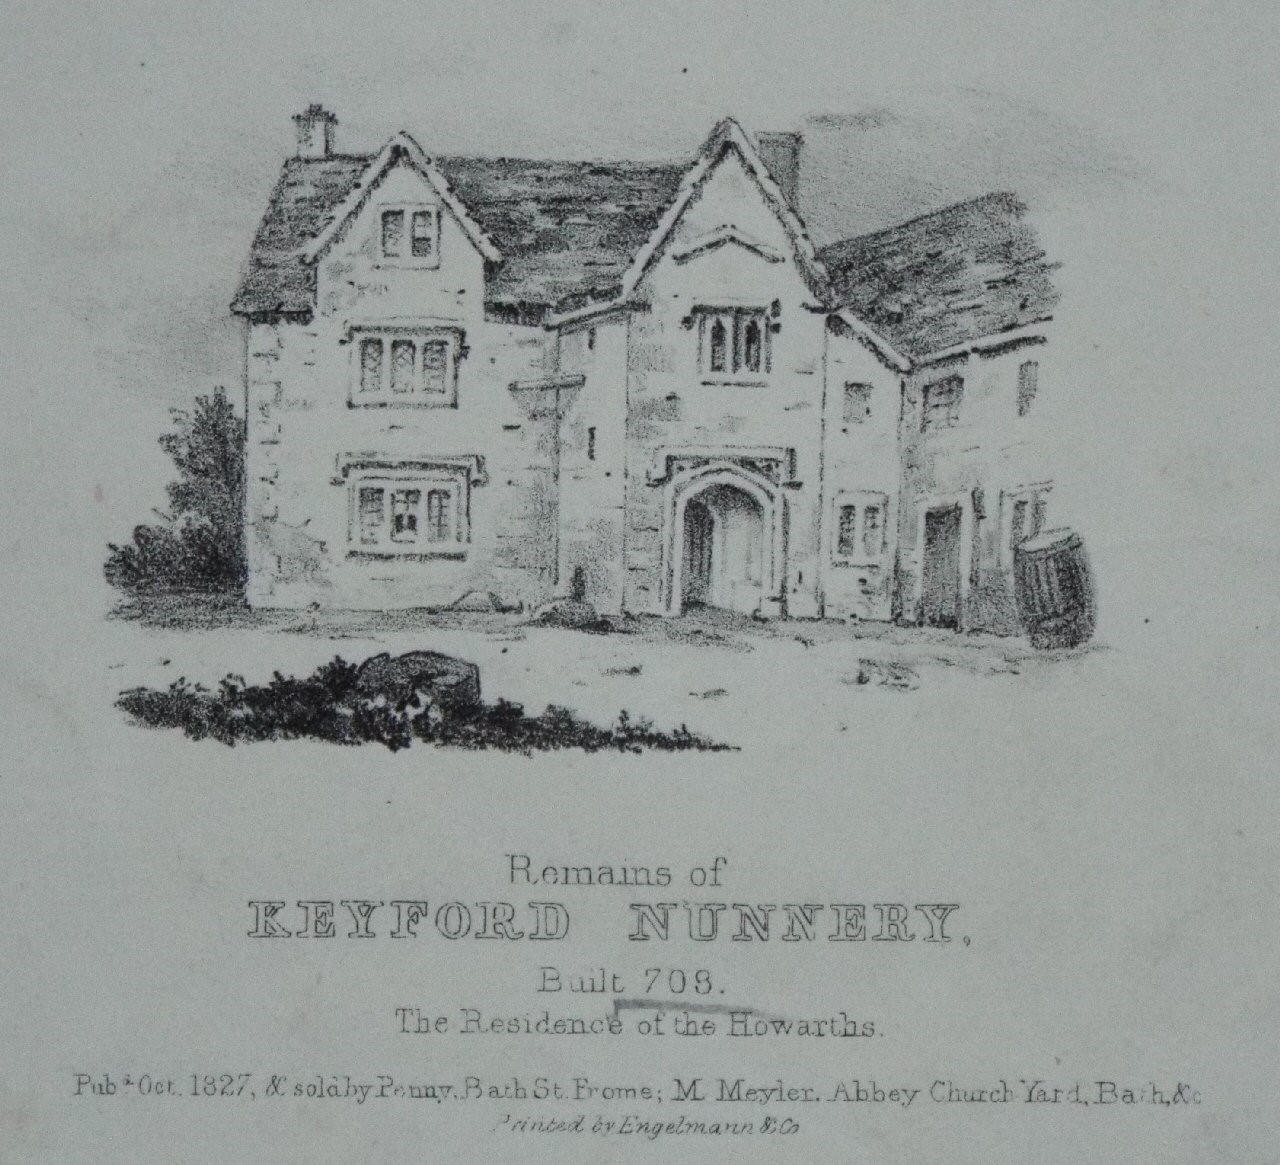 Lithograph - Remains of Keyford Rectory, Built 708. The Residence of the Howarths.